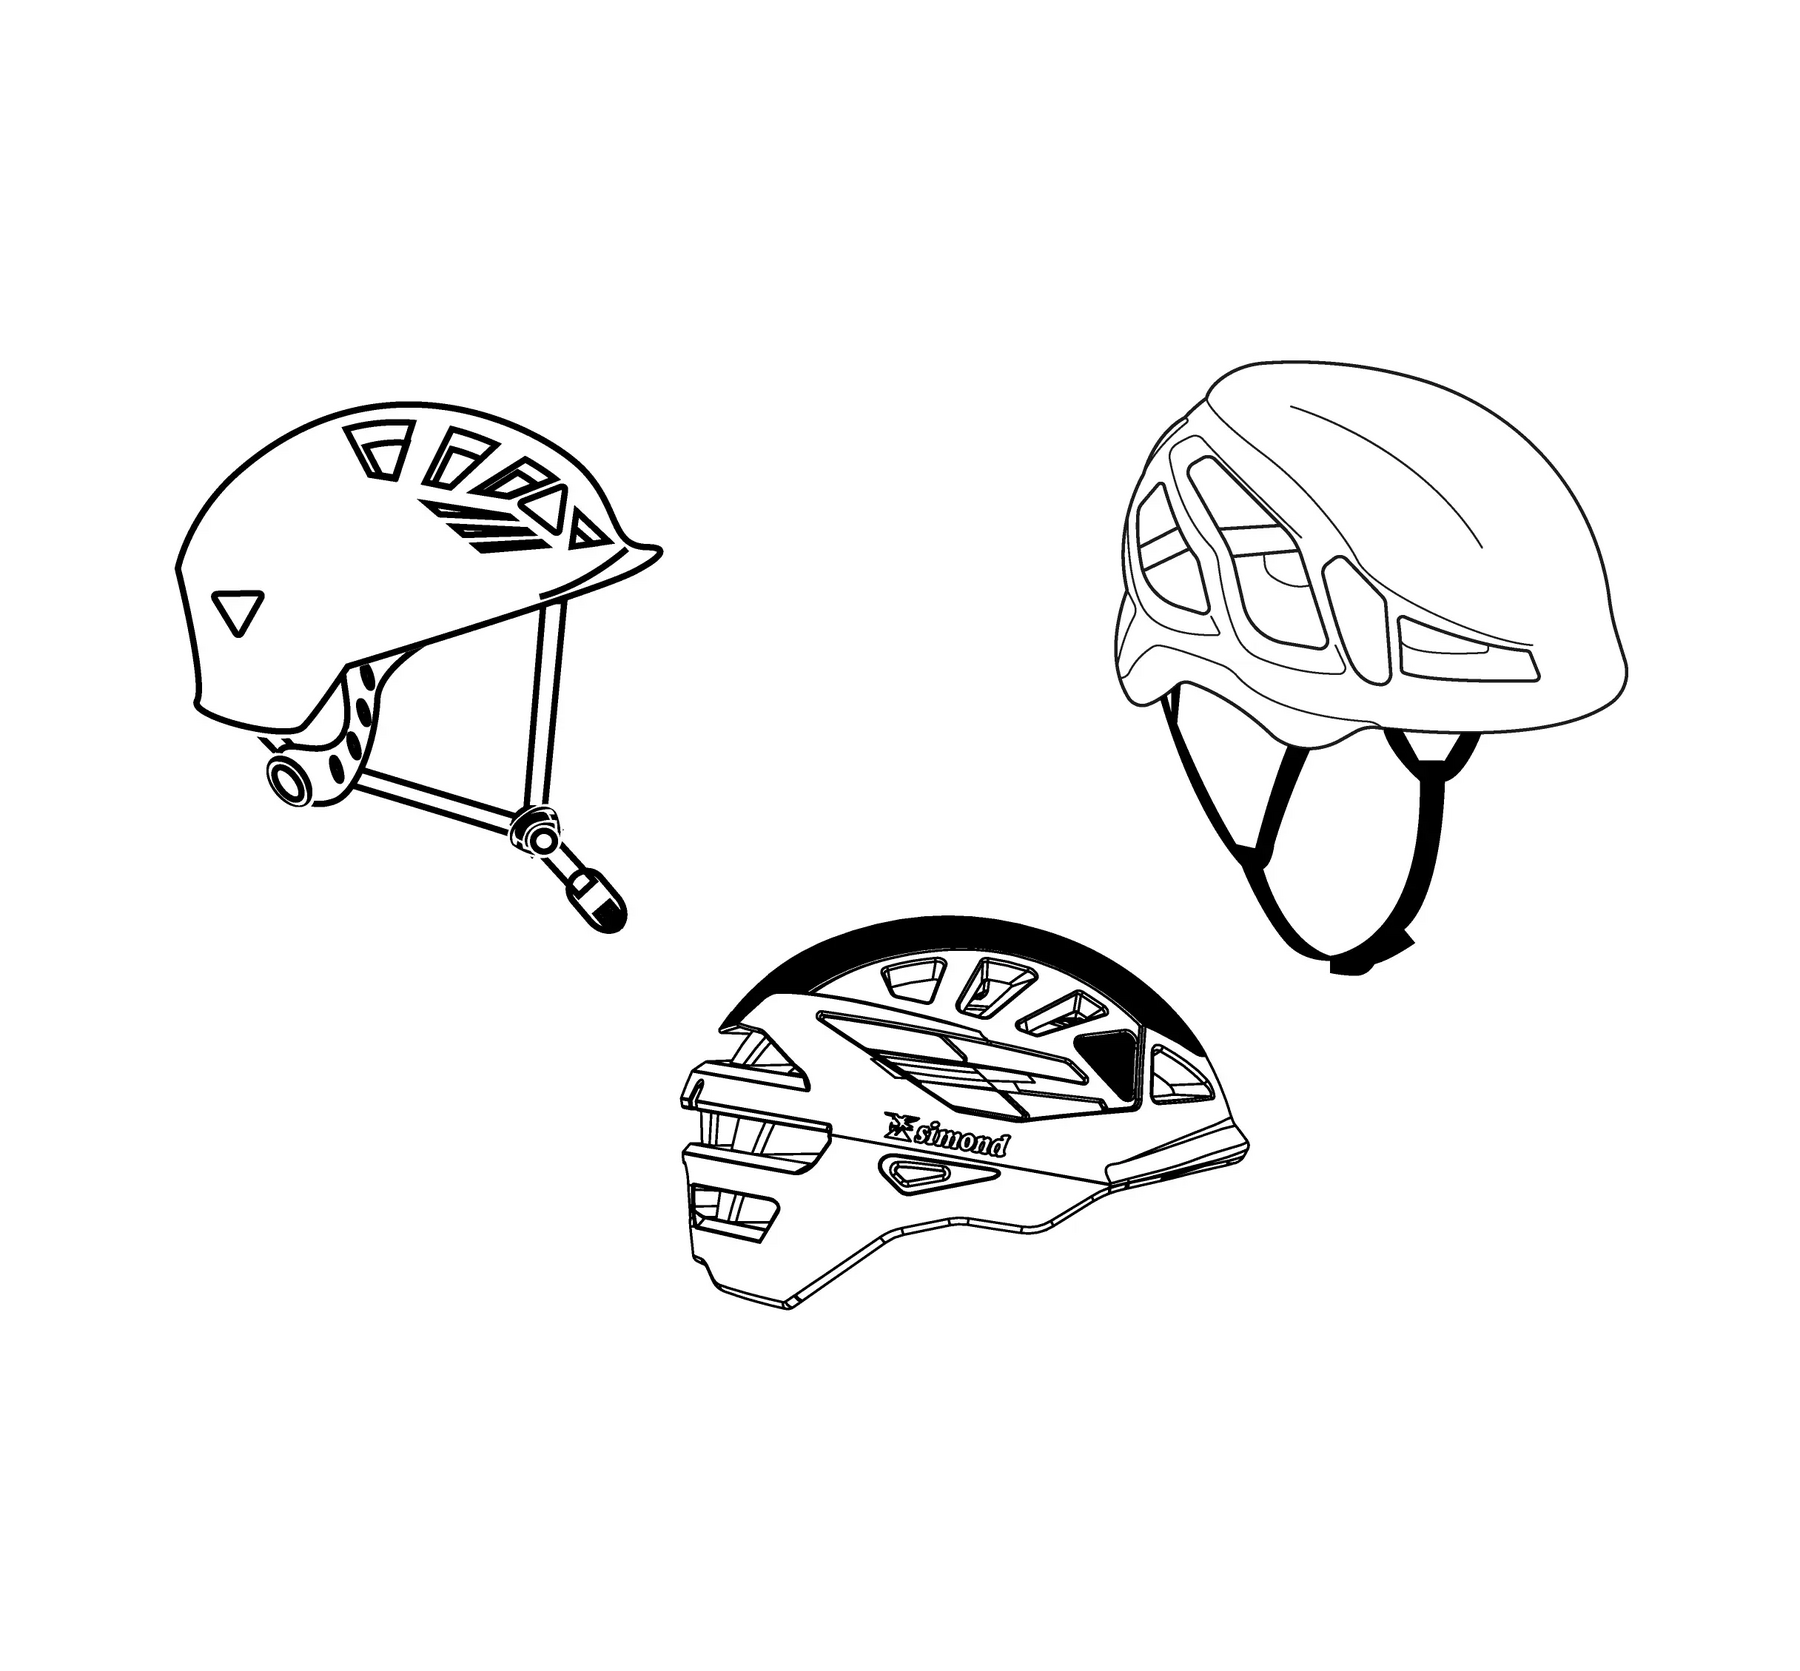 USER GUIDE HELMETS FOR MOUNTAINEERS